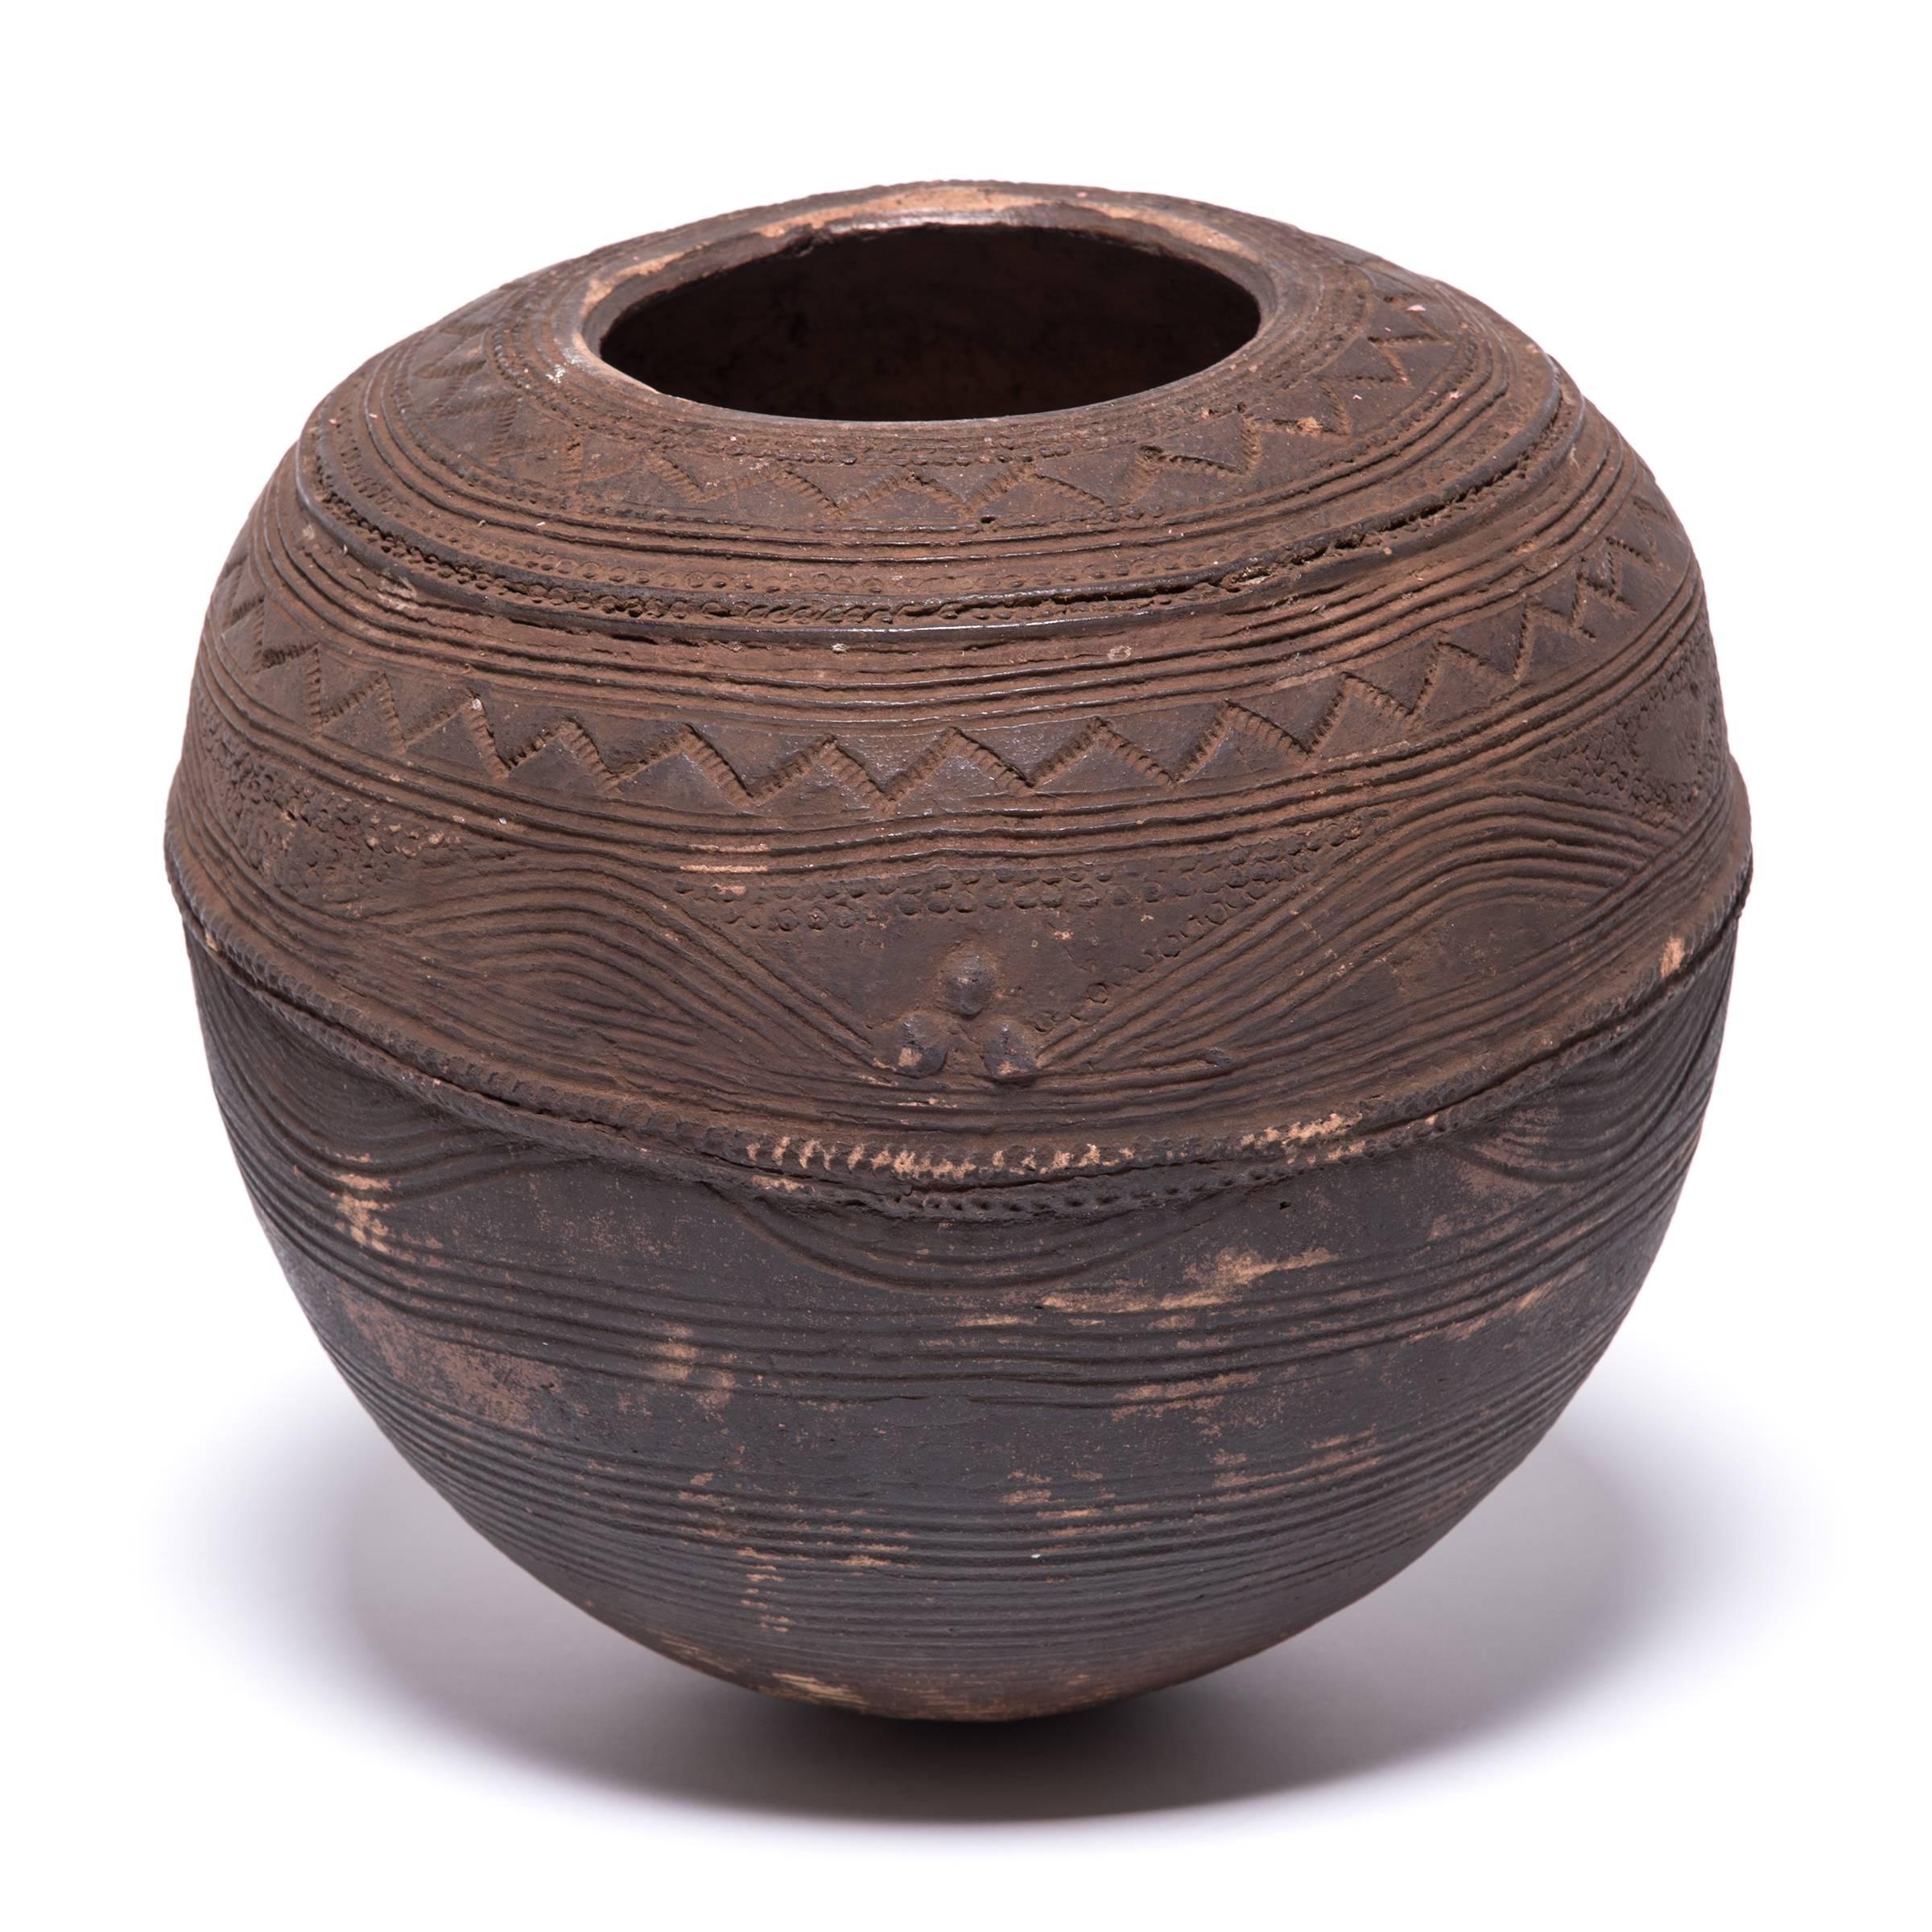 The Nupe people of Nigeria were touted as some of the finest ceramicists in Africa. Everyday objects, like this water vessel received detailed attention. The vessel's varied textures are an integral part of its utilitarian design. The patterns and